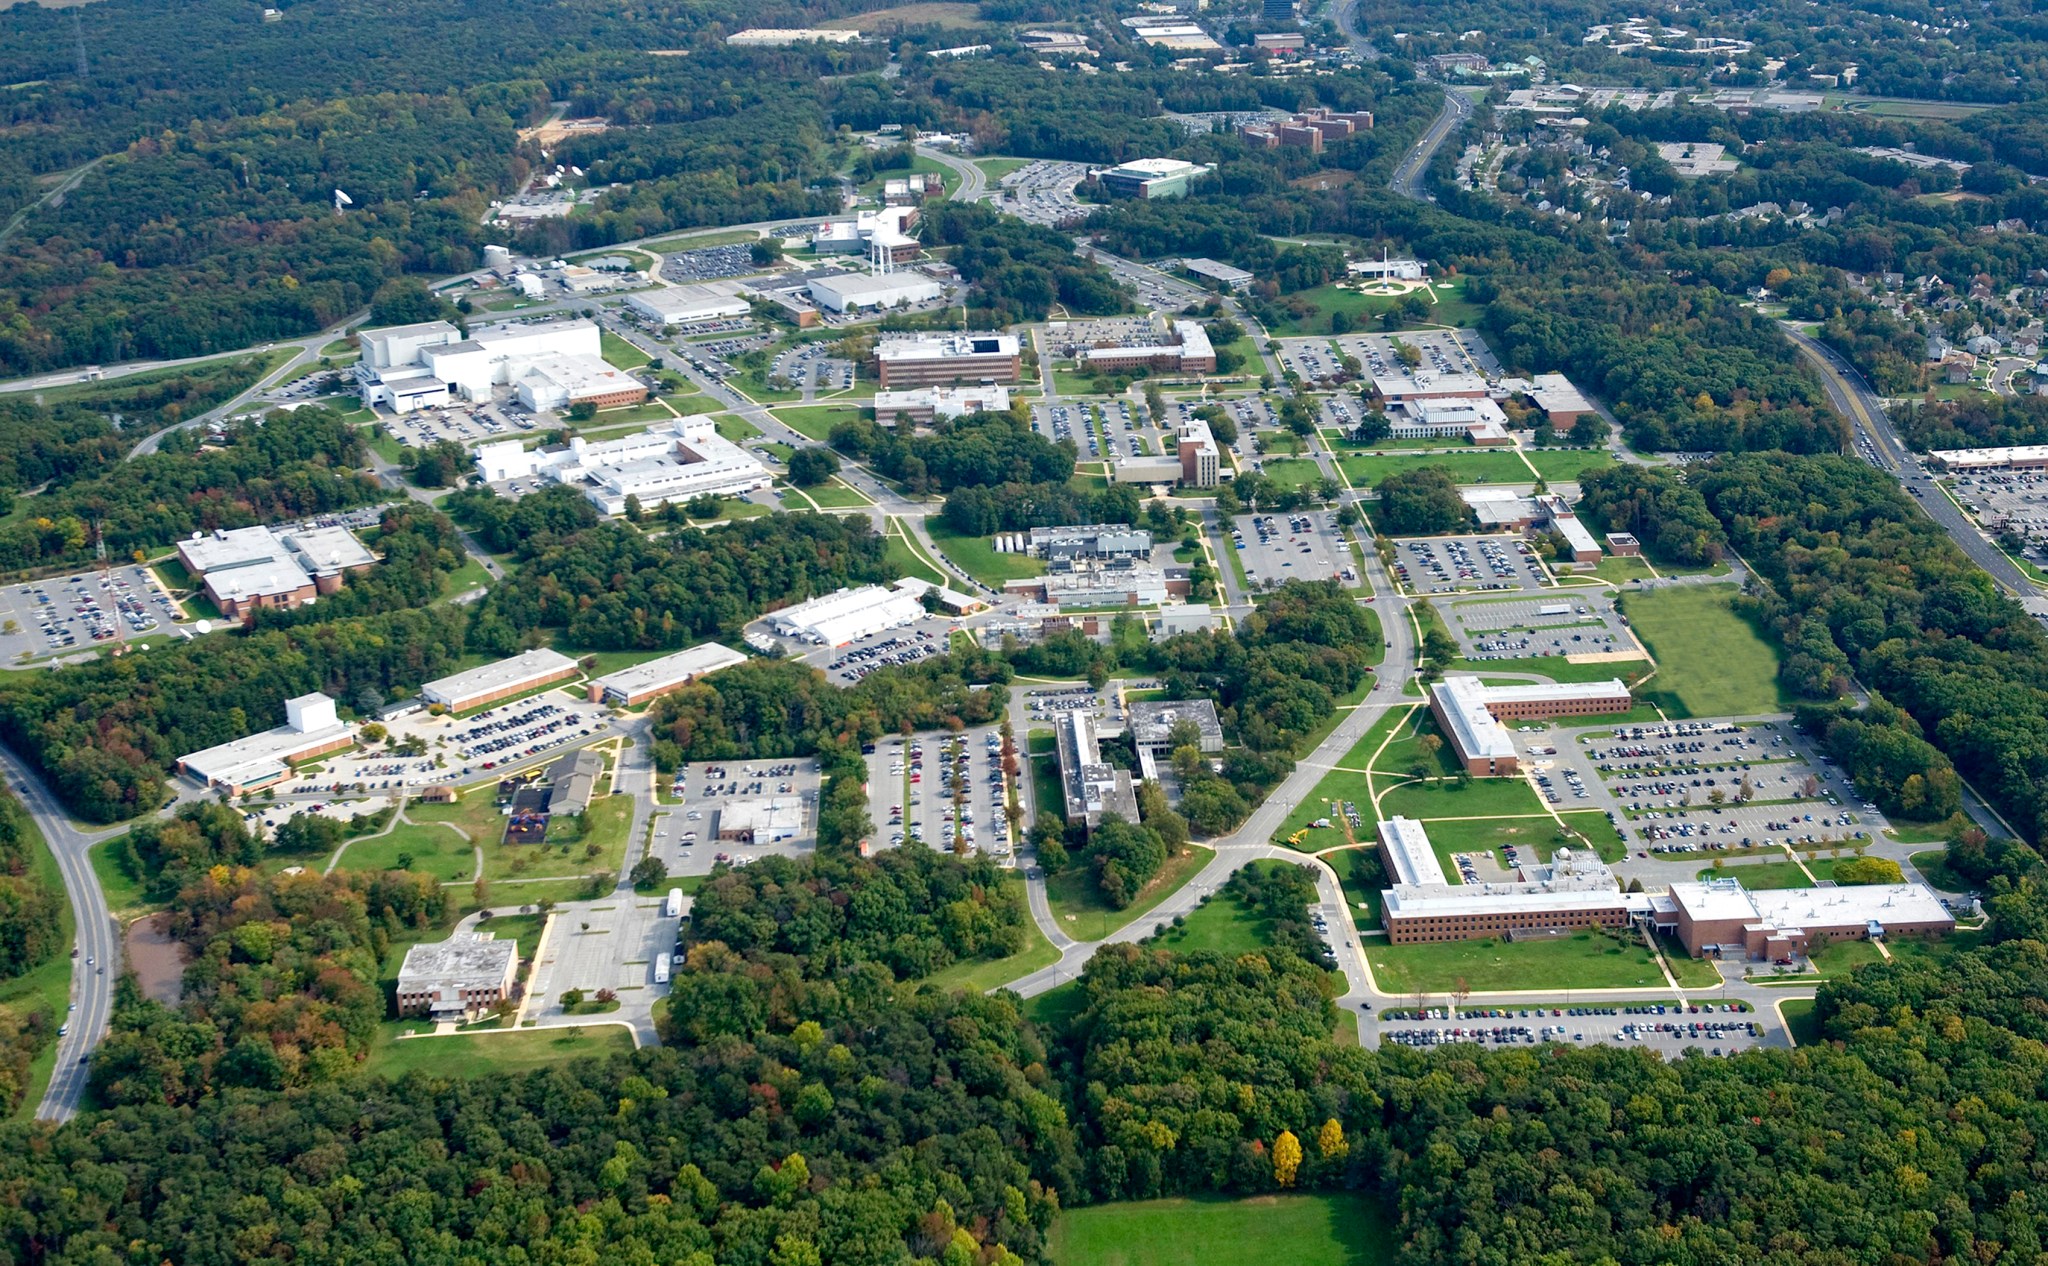 aerial view of Goddard Greenbelt campus showing buildings surrounded by greenery